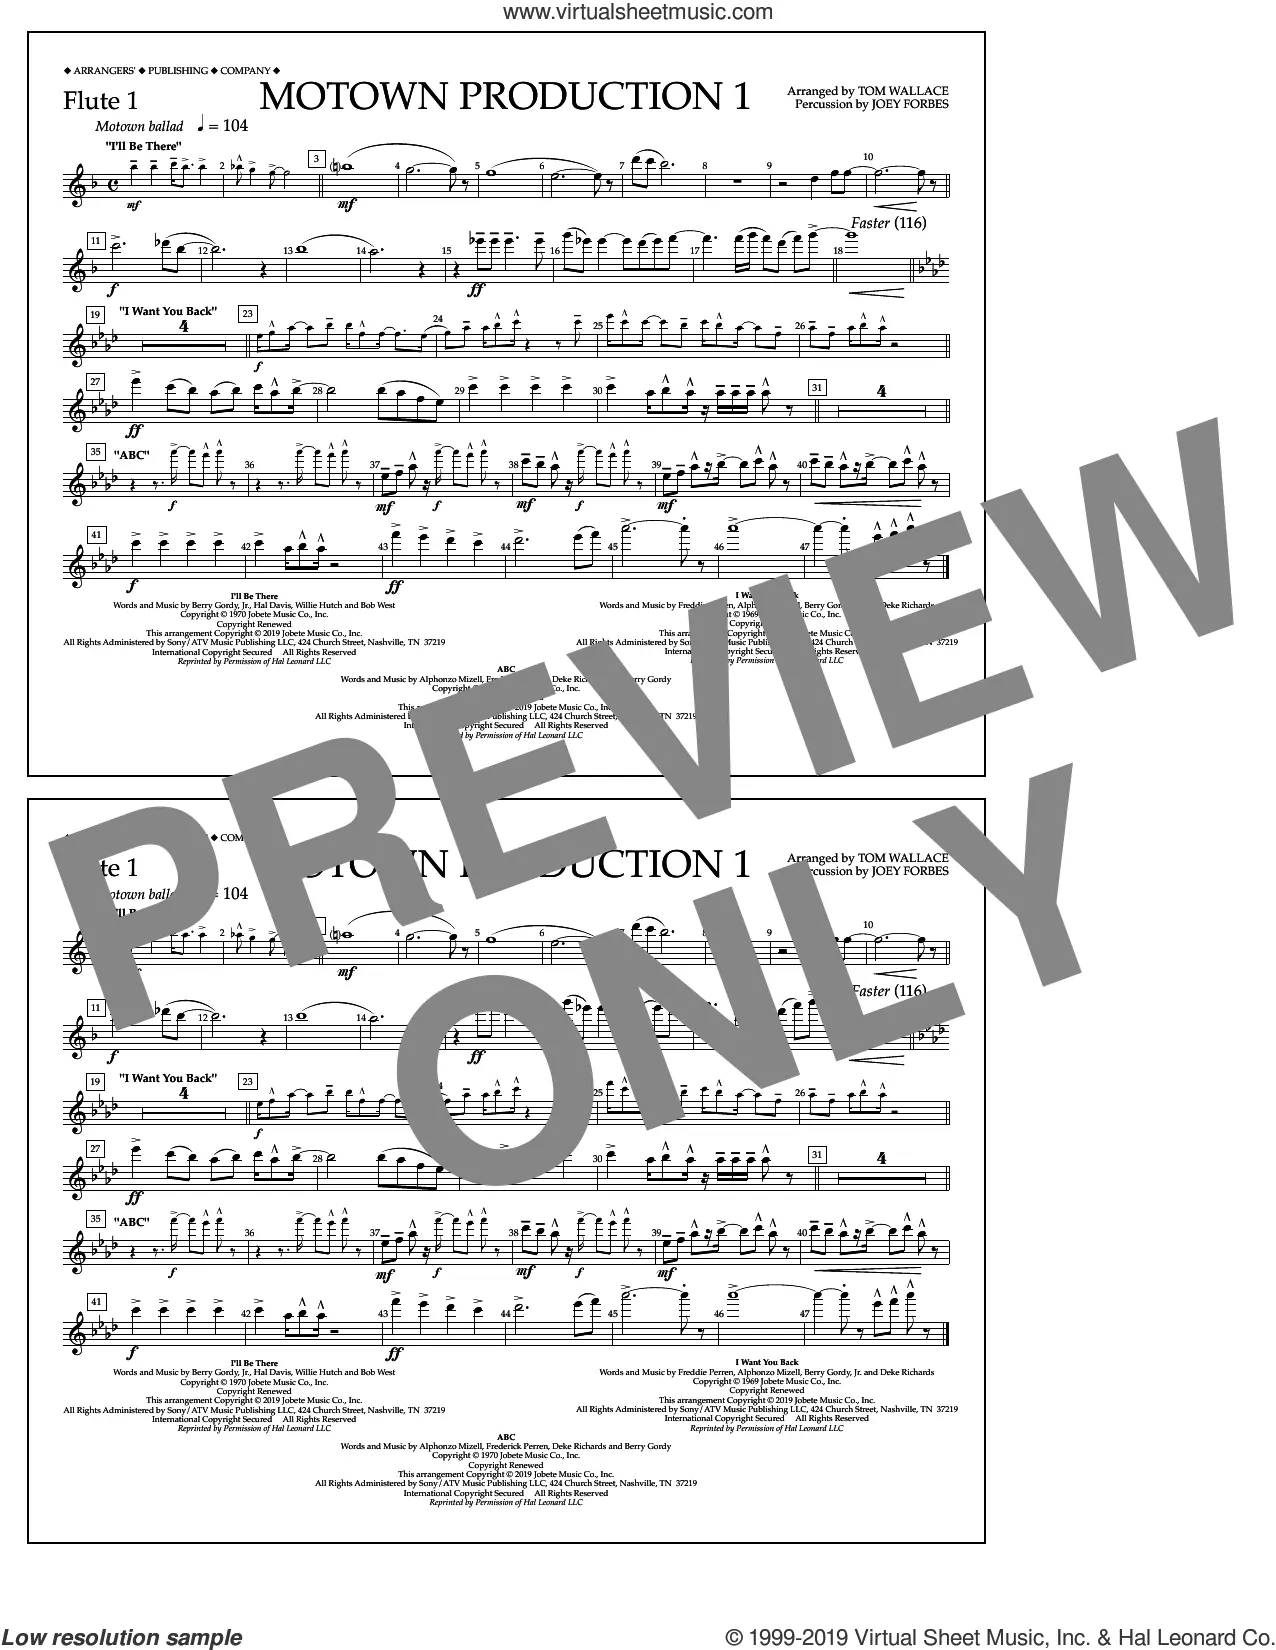 Download Digital Sheet Music of Marching band Flute for Marching band